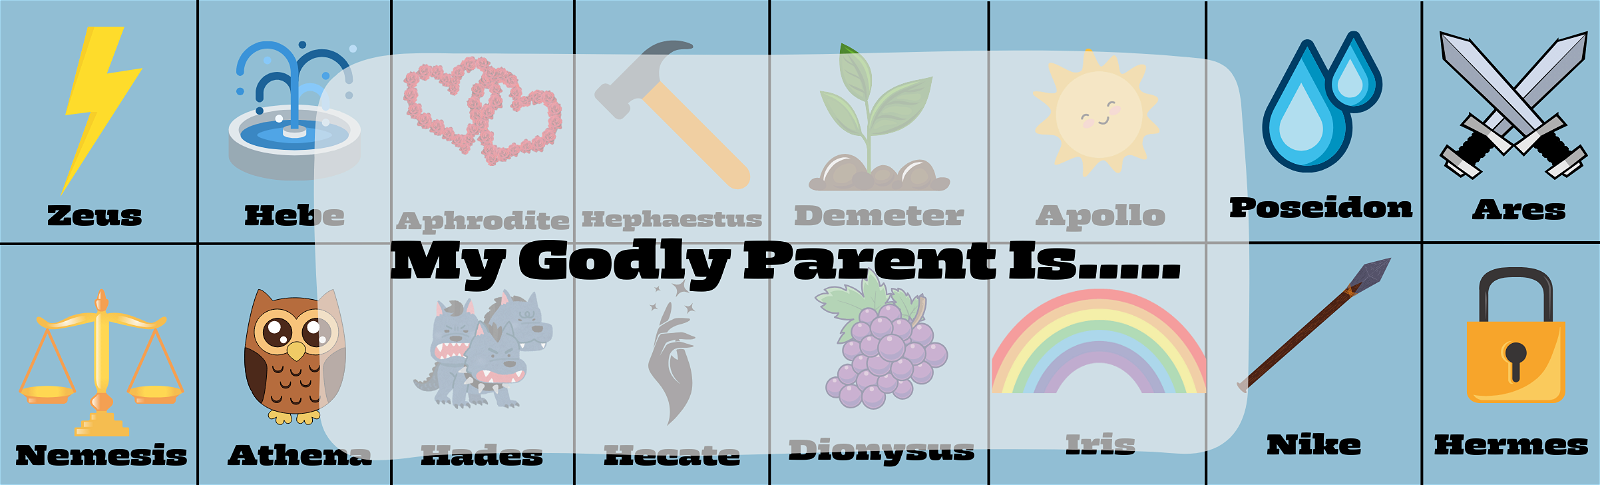 My Godly Parent is...